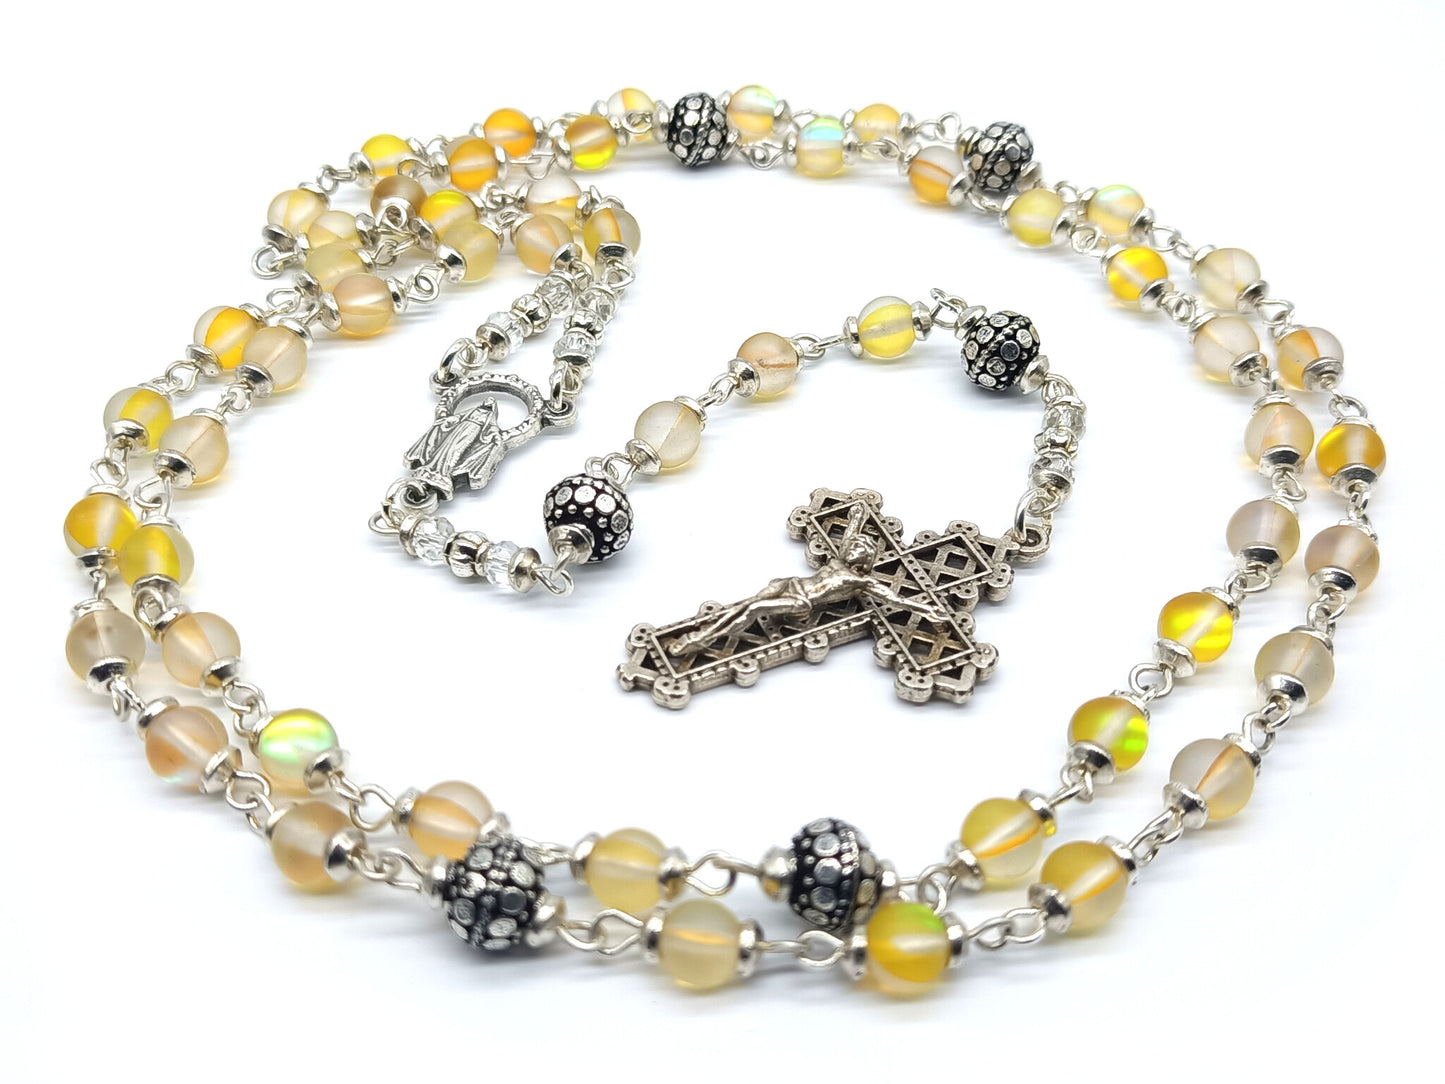 Miraculous medal unique rosary beads with yellow quartz gemstone beads, silver crucifix, pater beads and centre medal.